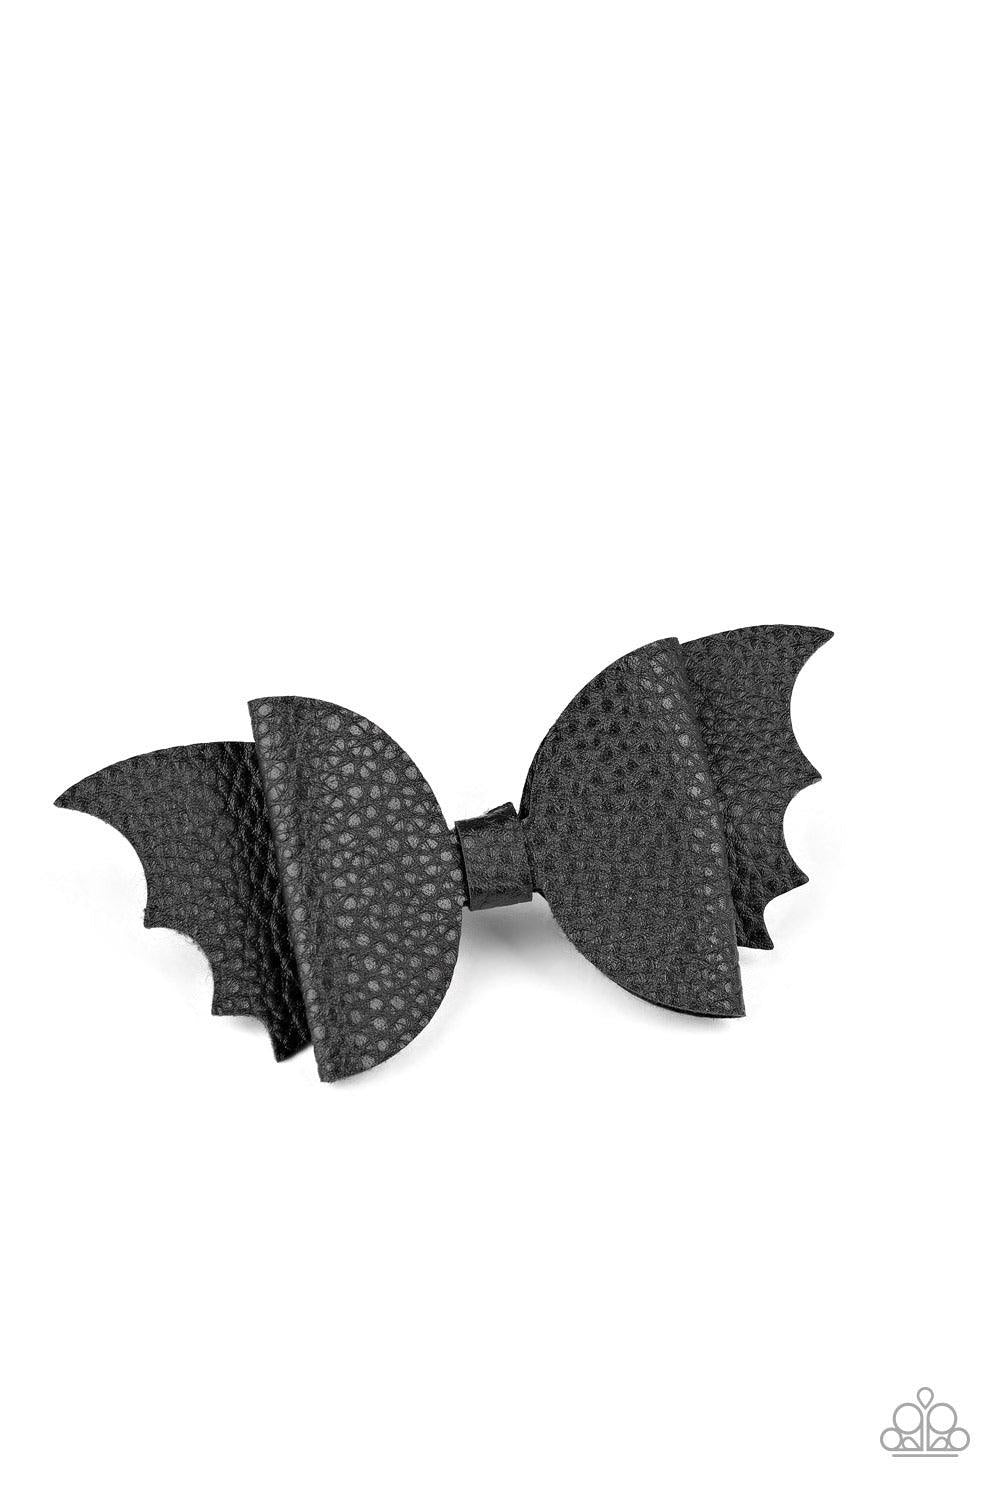 Paparazzi Accessories Drive Them Batty! - Black Featuring scalloped edges, a piece of black leather delicately knots into a spooky bat-like bow. Features a standard hair clip on the back. Sold as one individual hair clip. Jewelry